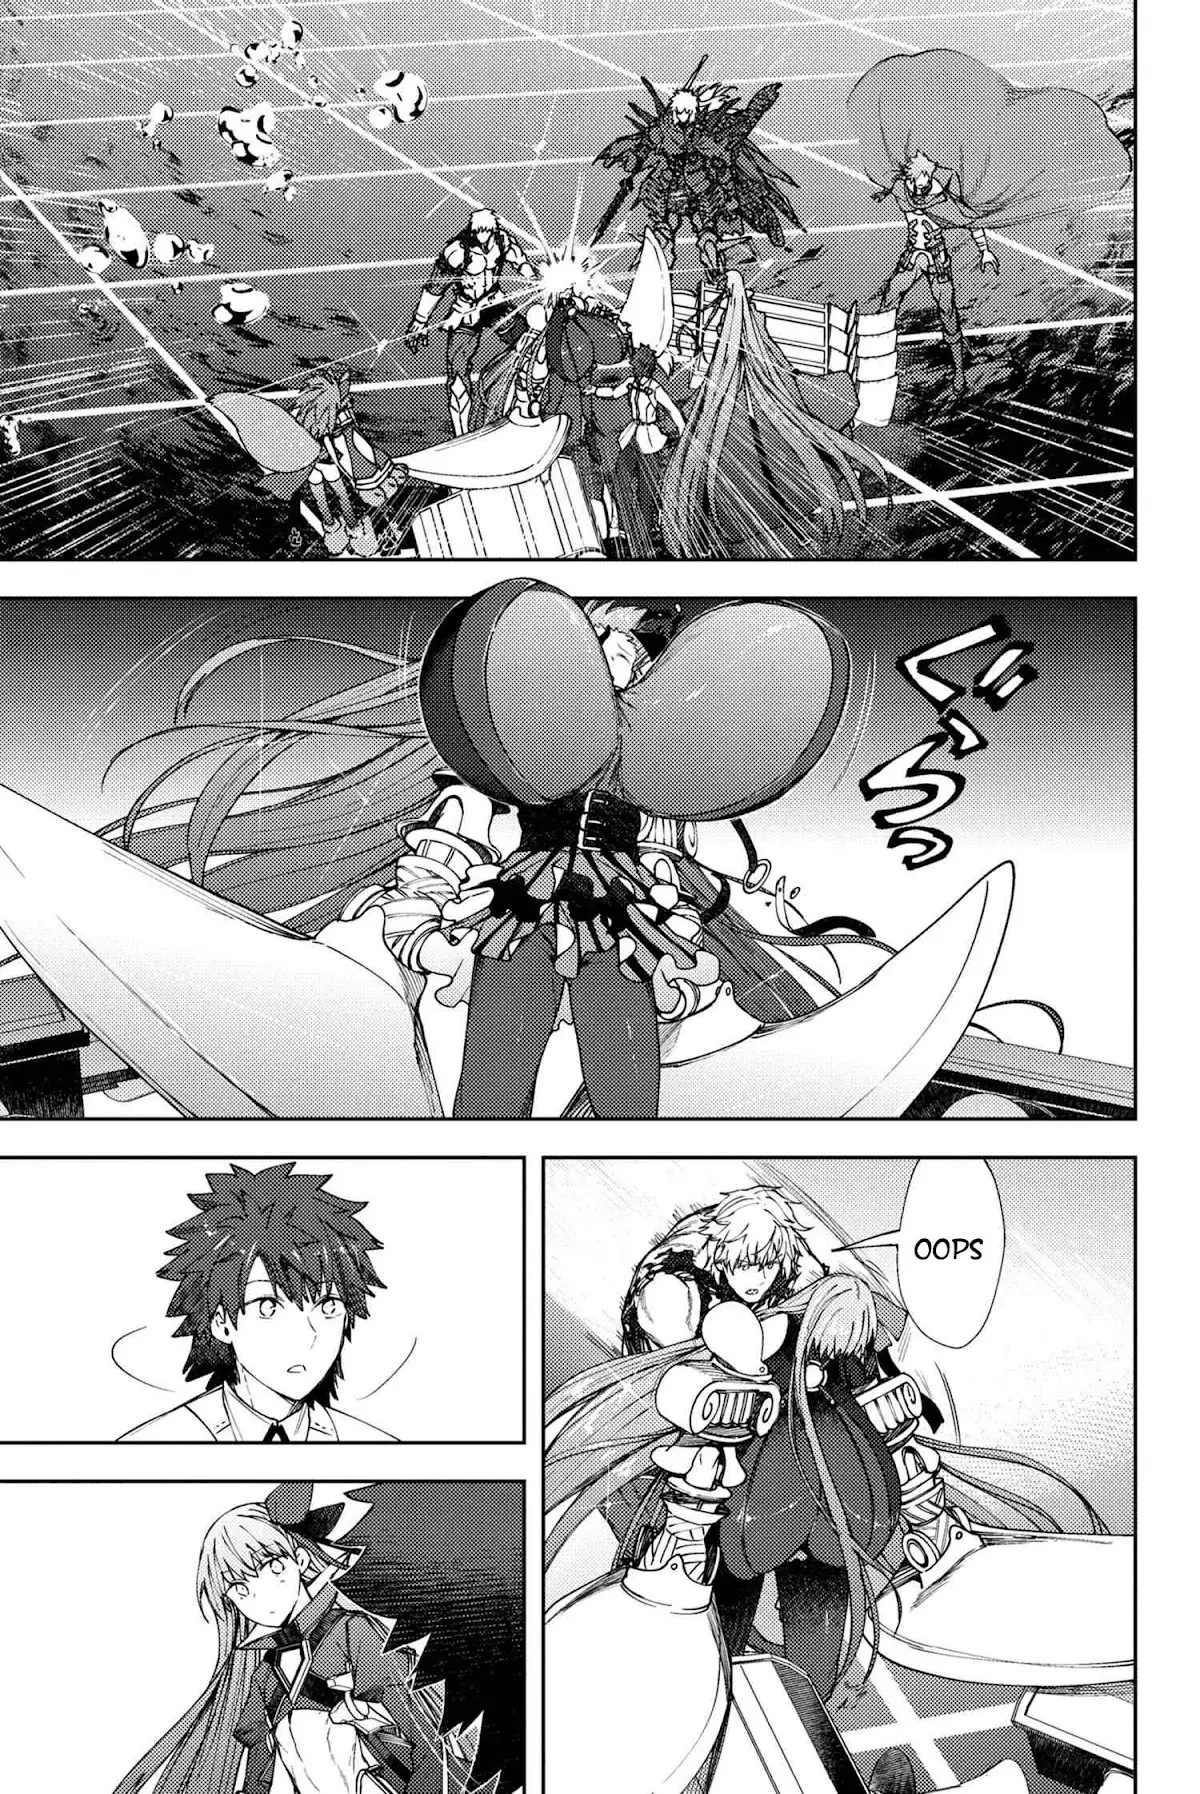 Fate/grand Order -Epic Of Remnant- Deep Sea Cyber-Paradise Se.ra.ph - 17.3 page 9-0fecde76